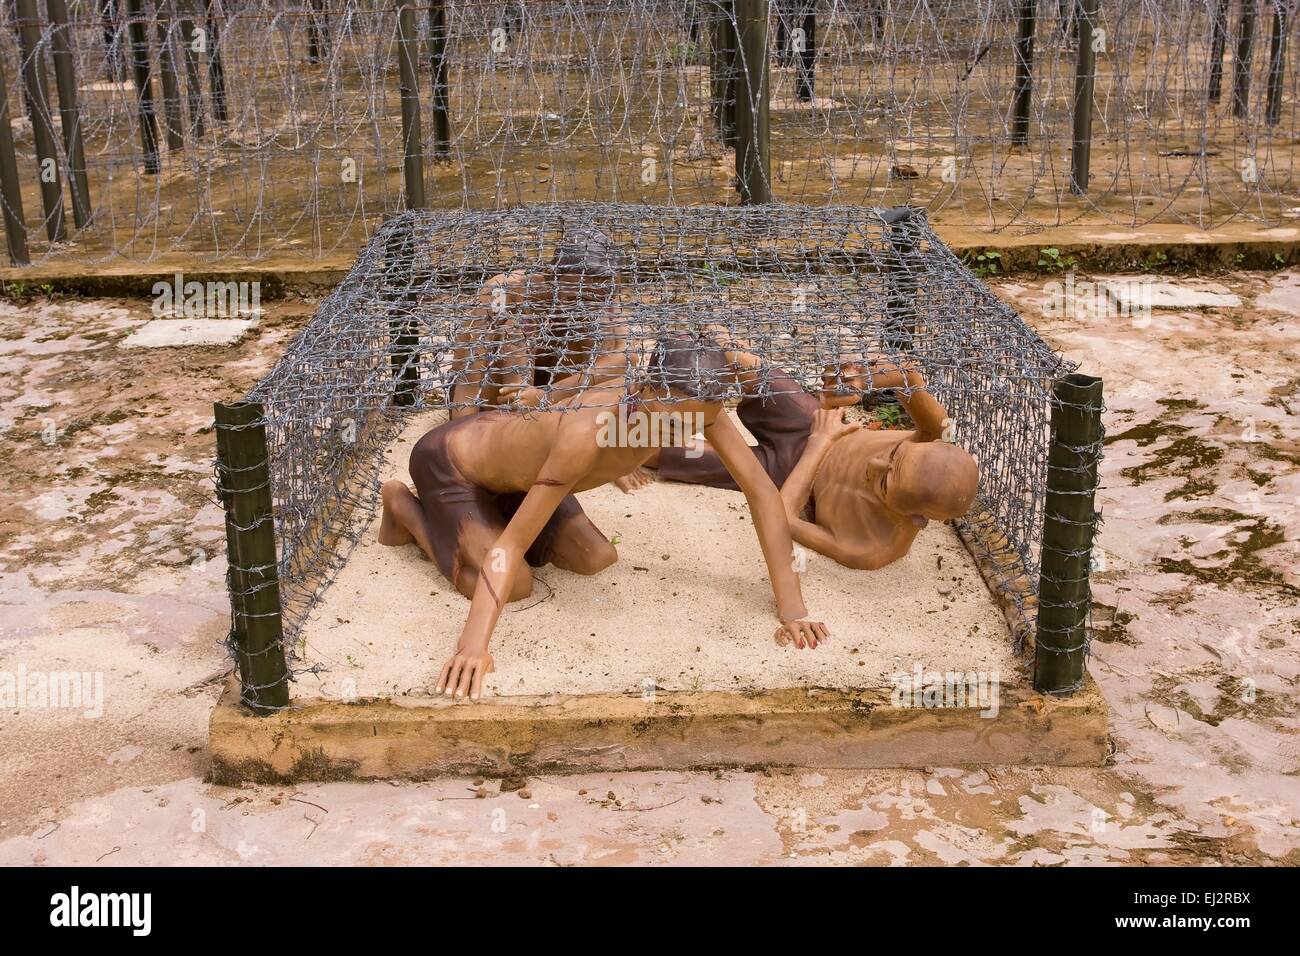 Former prison for prisoners of war on Phu Quoc Island, now a museum, sculptures depict the conditions of detention, Phu Quoc Island, Vietnam, Asia Stock Photo